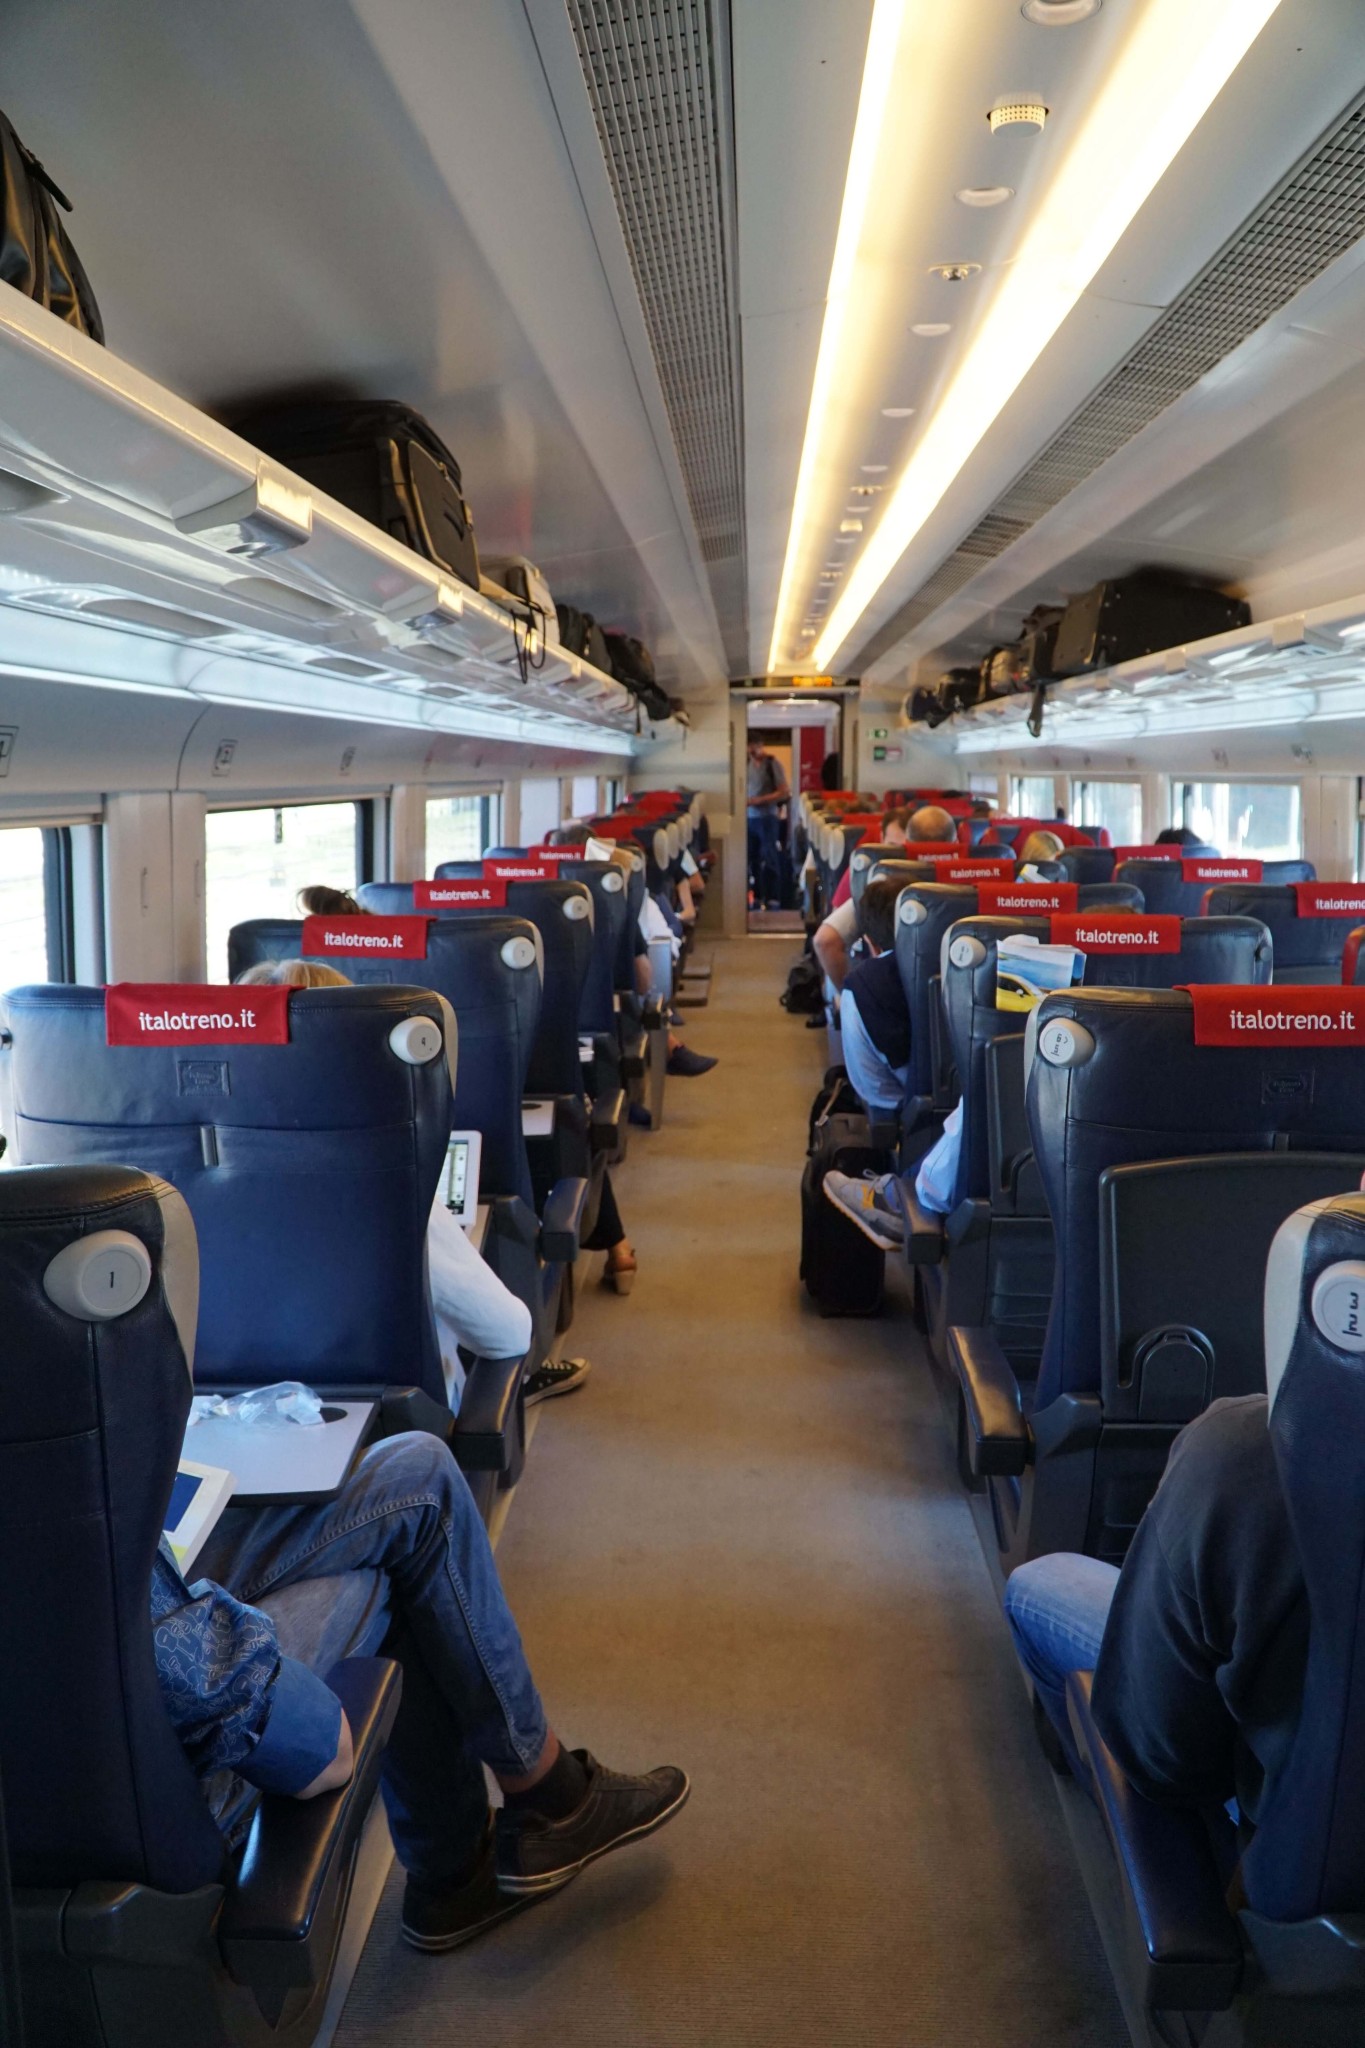 Top Ten Tips to Know Before Booking Tickets and Taking the Train